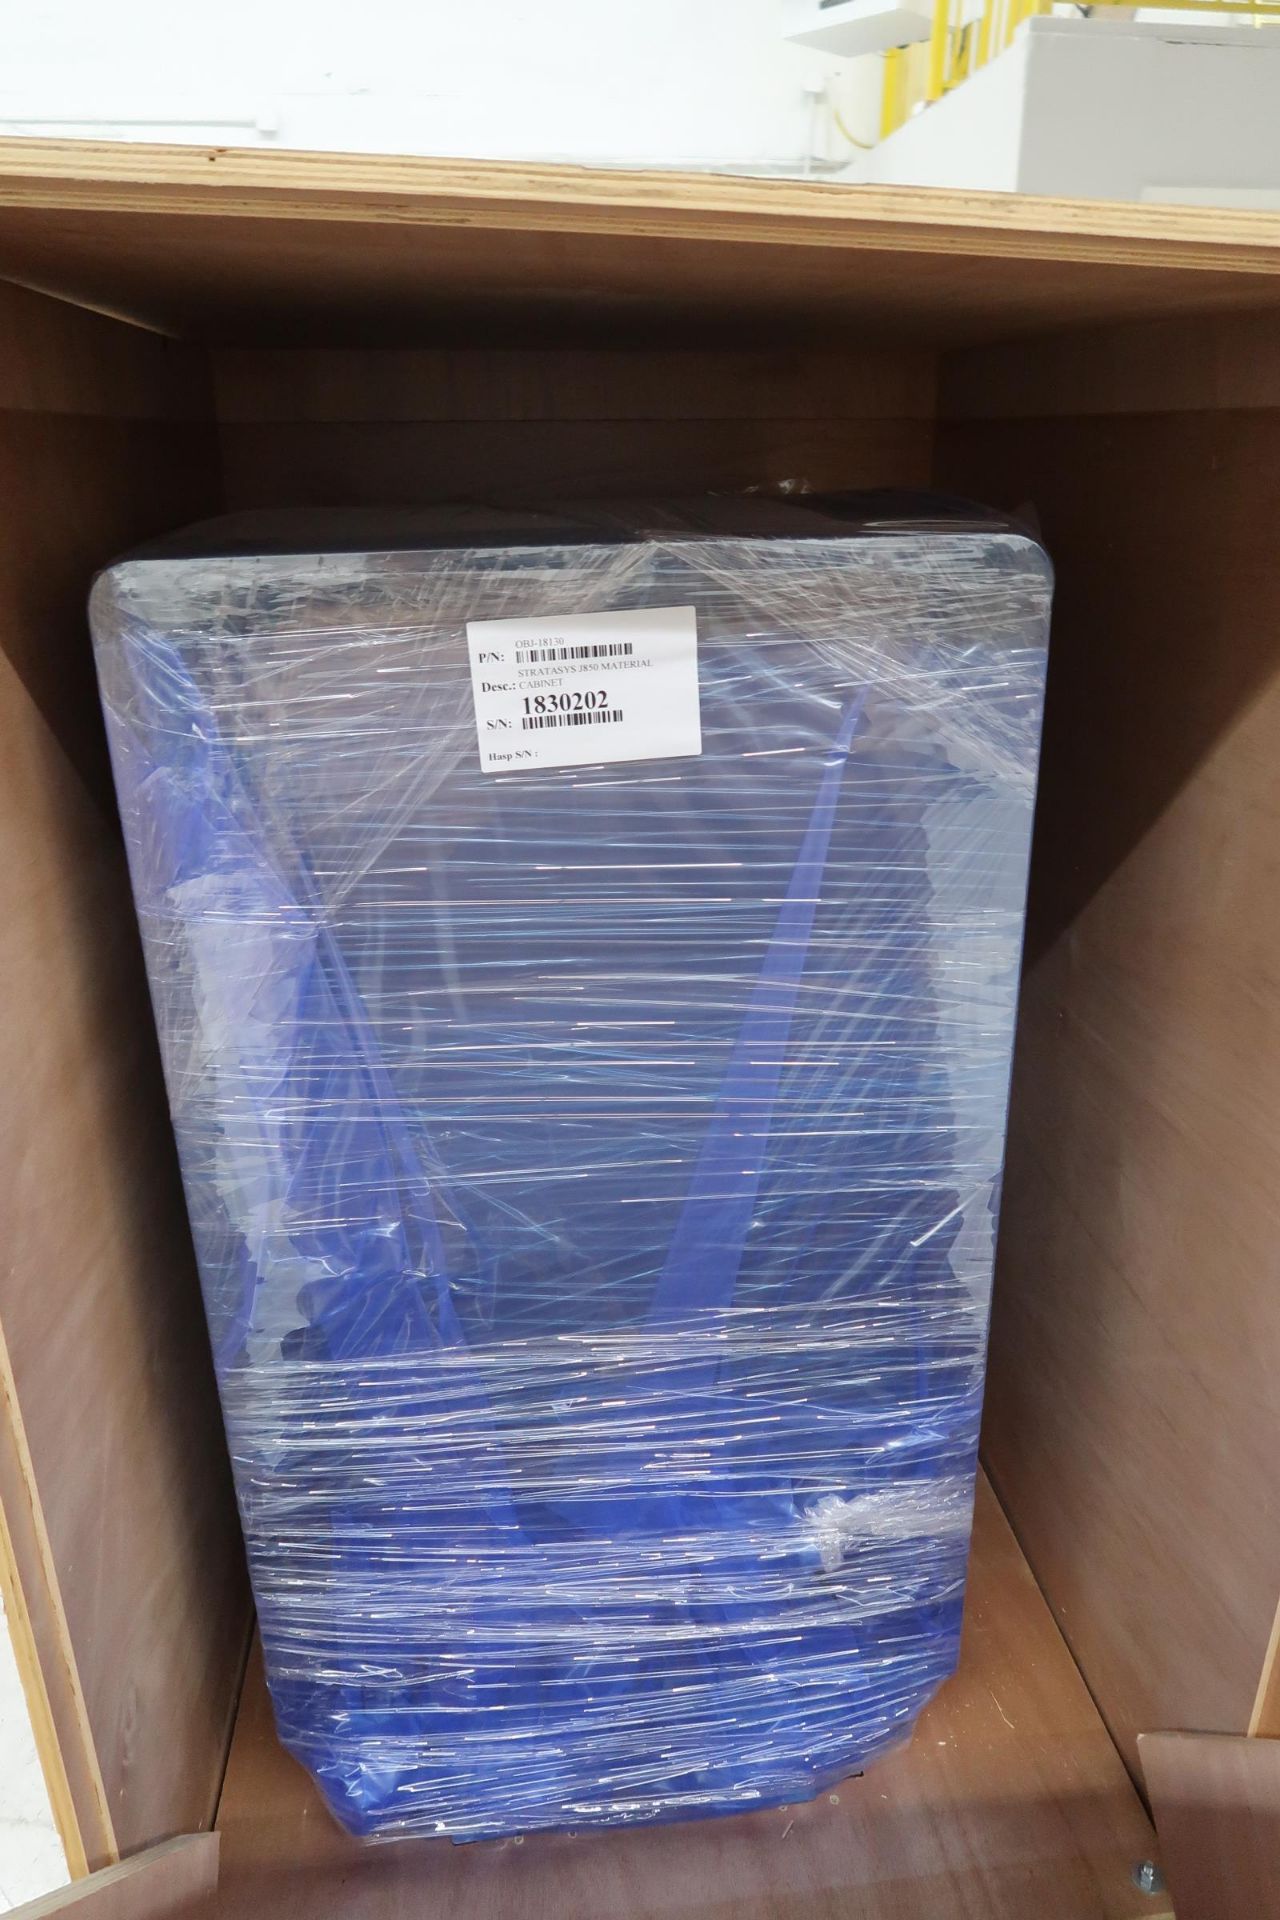 Stratasys OBJ18130 Duplex Material Cabinet s/n 183202 (NEW IN CRATE For J850 3D Printers) SOLD AS IS - Image 5 of 9